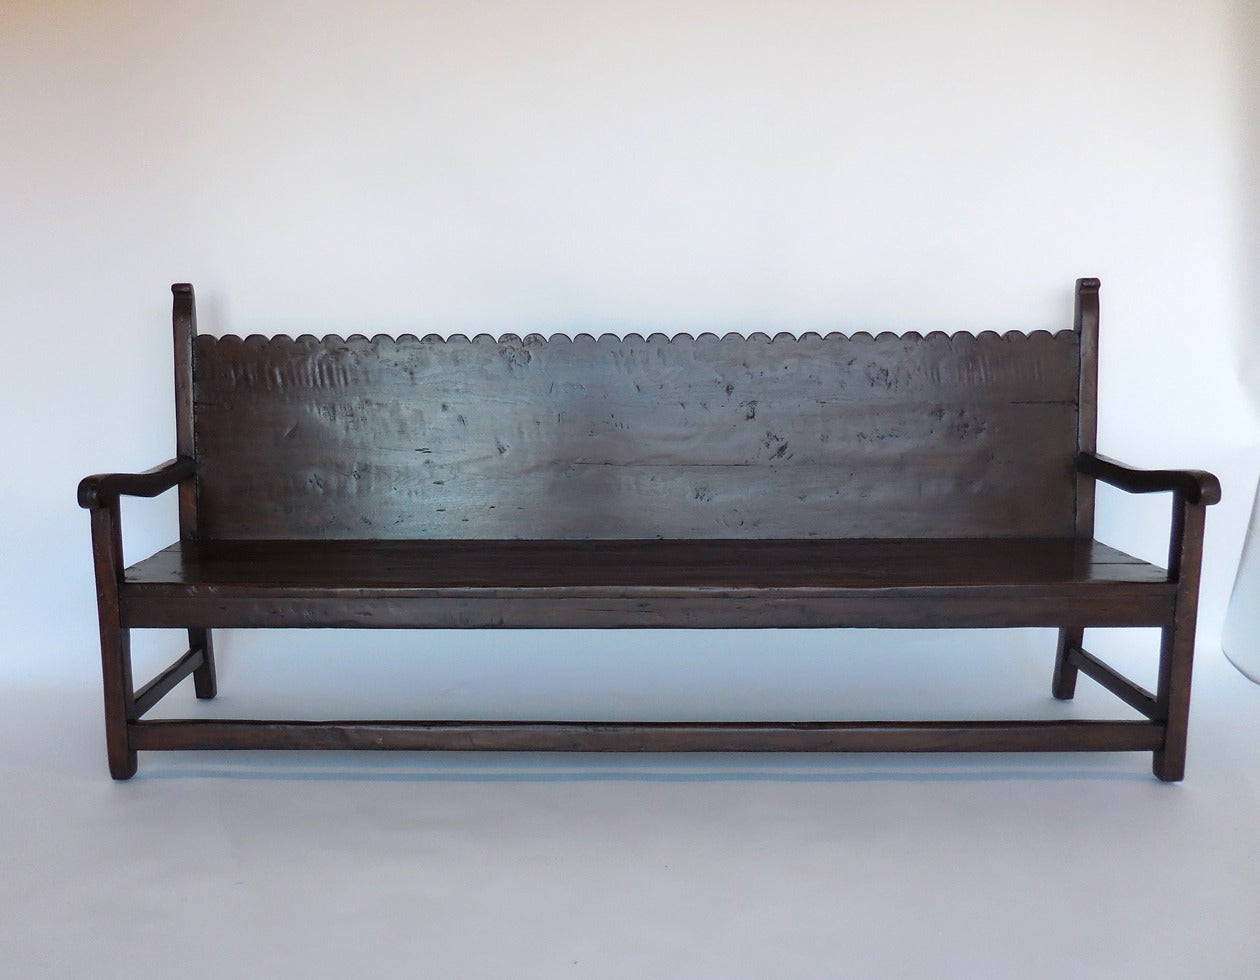 Custom walnut scalloped back bench. Can be made in a variety of woods and finishes. Classic colonial design. Made in LA by Dos Gallos Studio. Can be customized.
CUSTOM PRICES ARE SUBJECT TO CHANGE DUE TO FLUCTUATING WOOD  AND LABOR PRICES. PLEASE